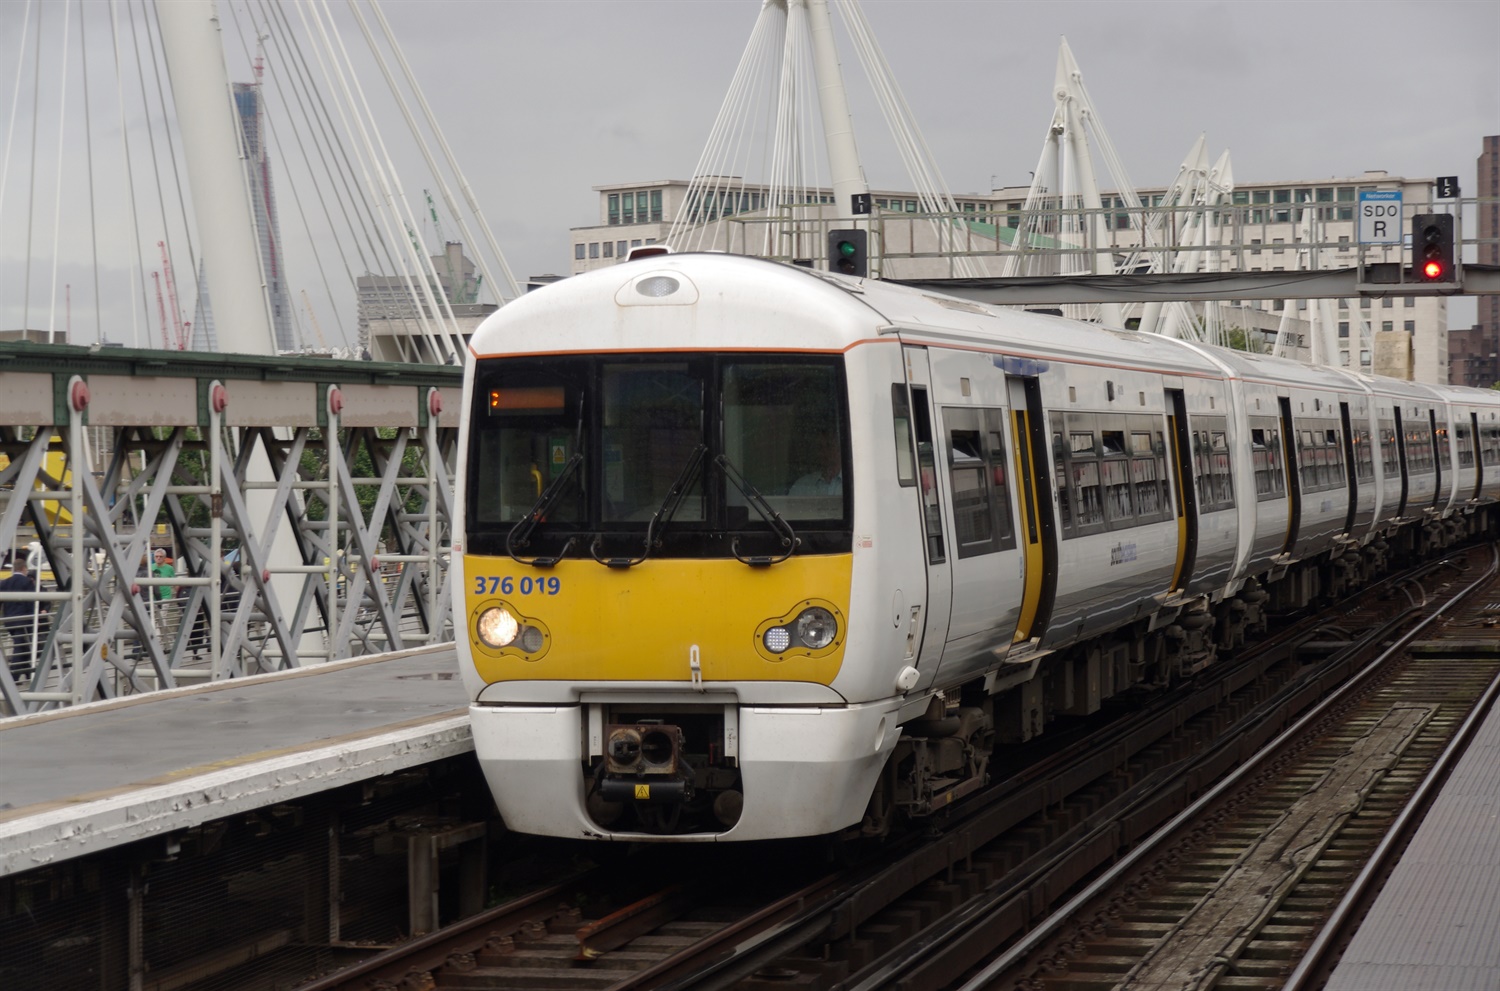 TfL targeting Southeastern metro services for takeover